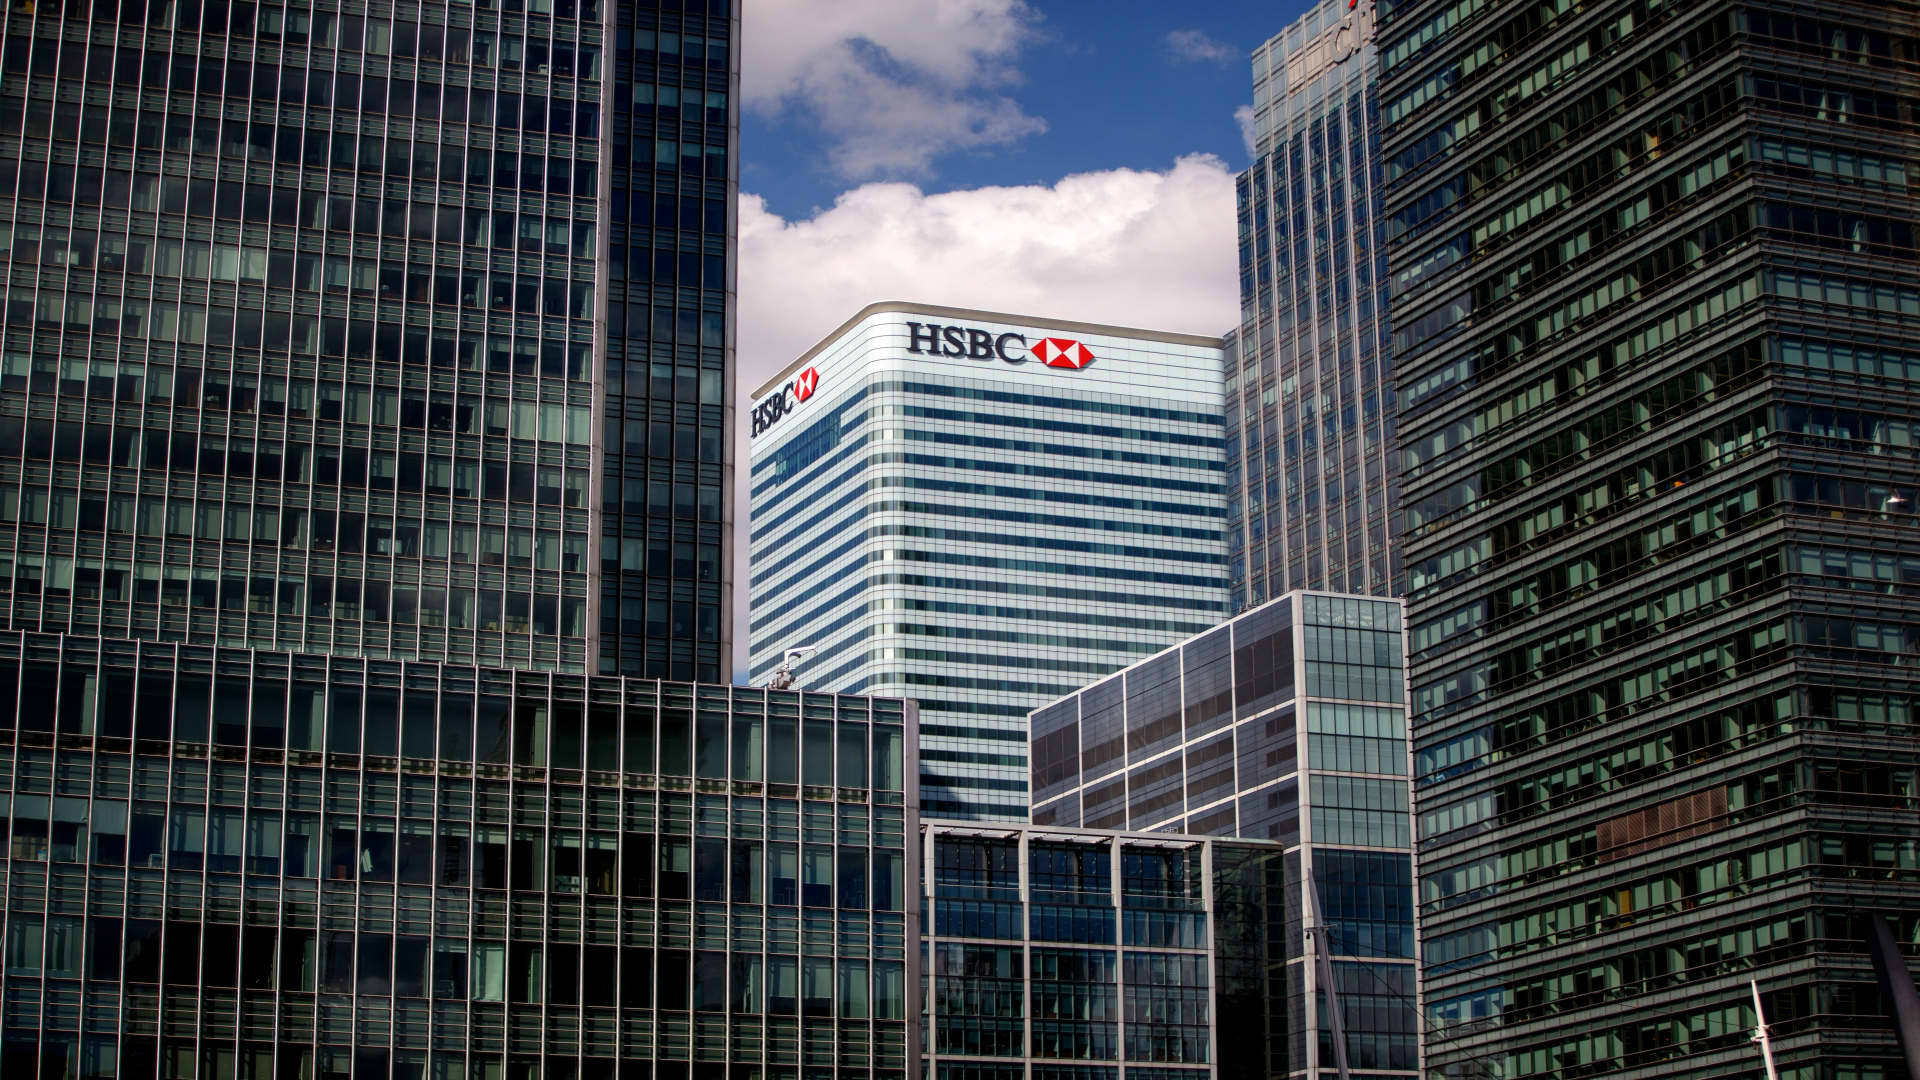 HSBC CEO on Farage-Coutts spat: 'We do not exit clients based on their lawful personal views'